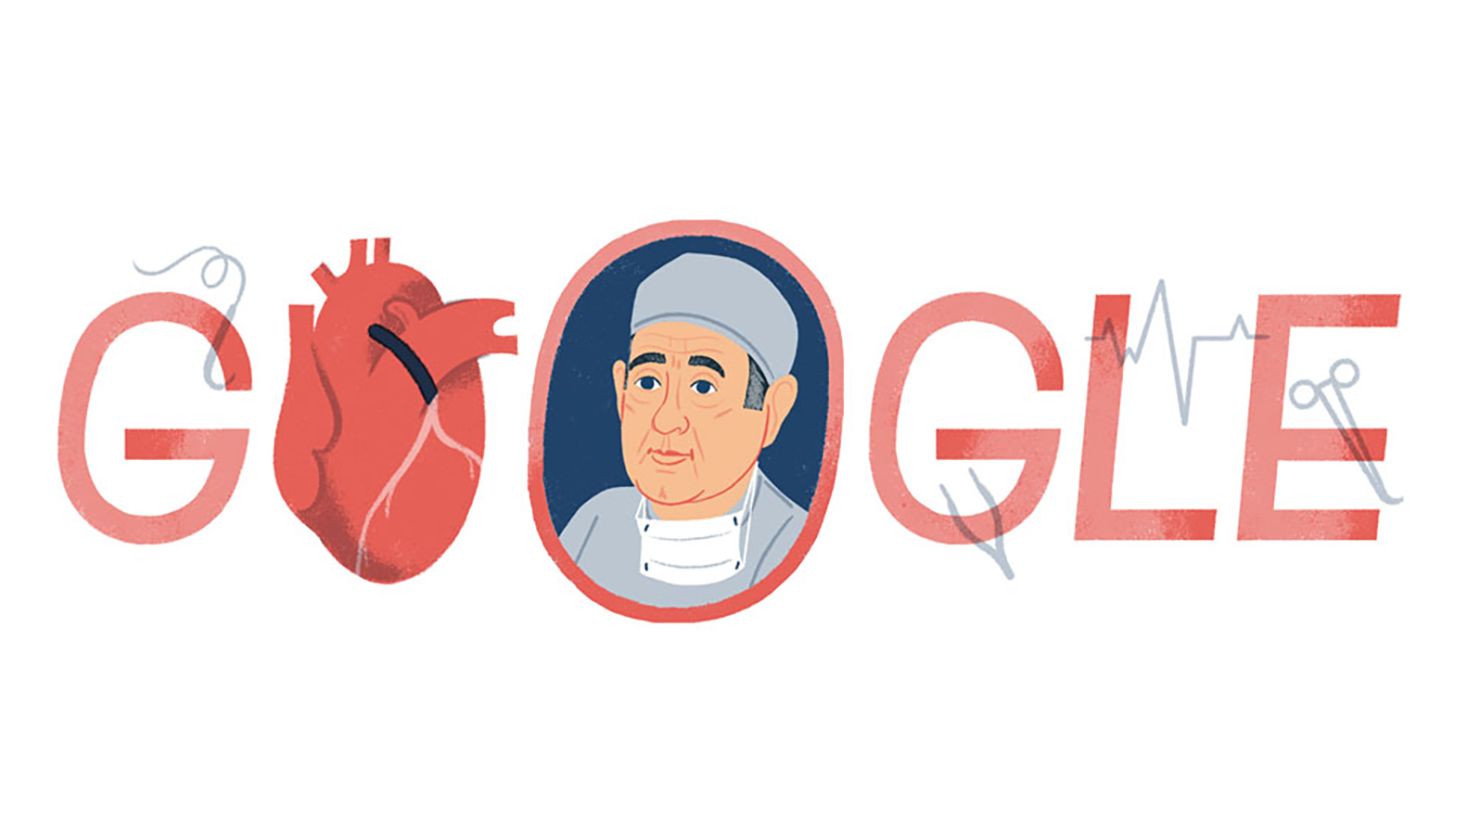 On what would've been his 96th birthday, Dr. Rene Favaloro got the Google Doodle treatment for his contribution to medicine and social justice. 